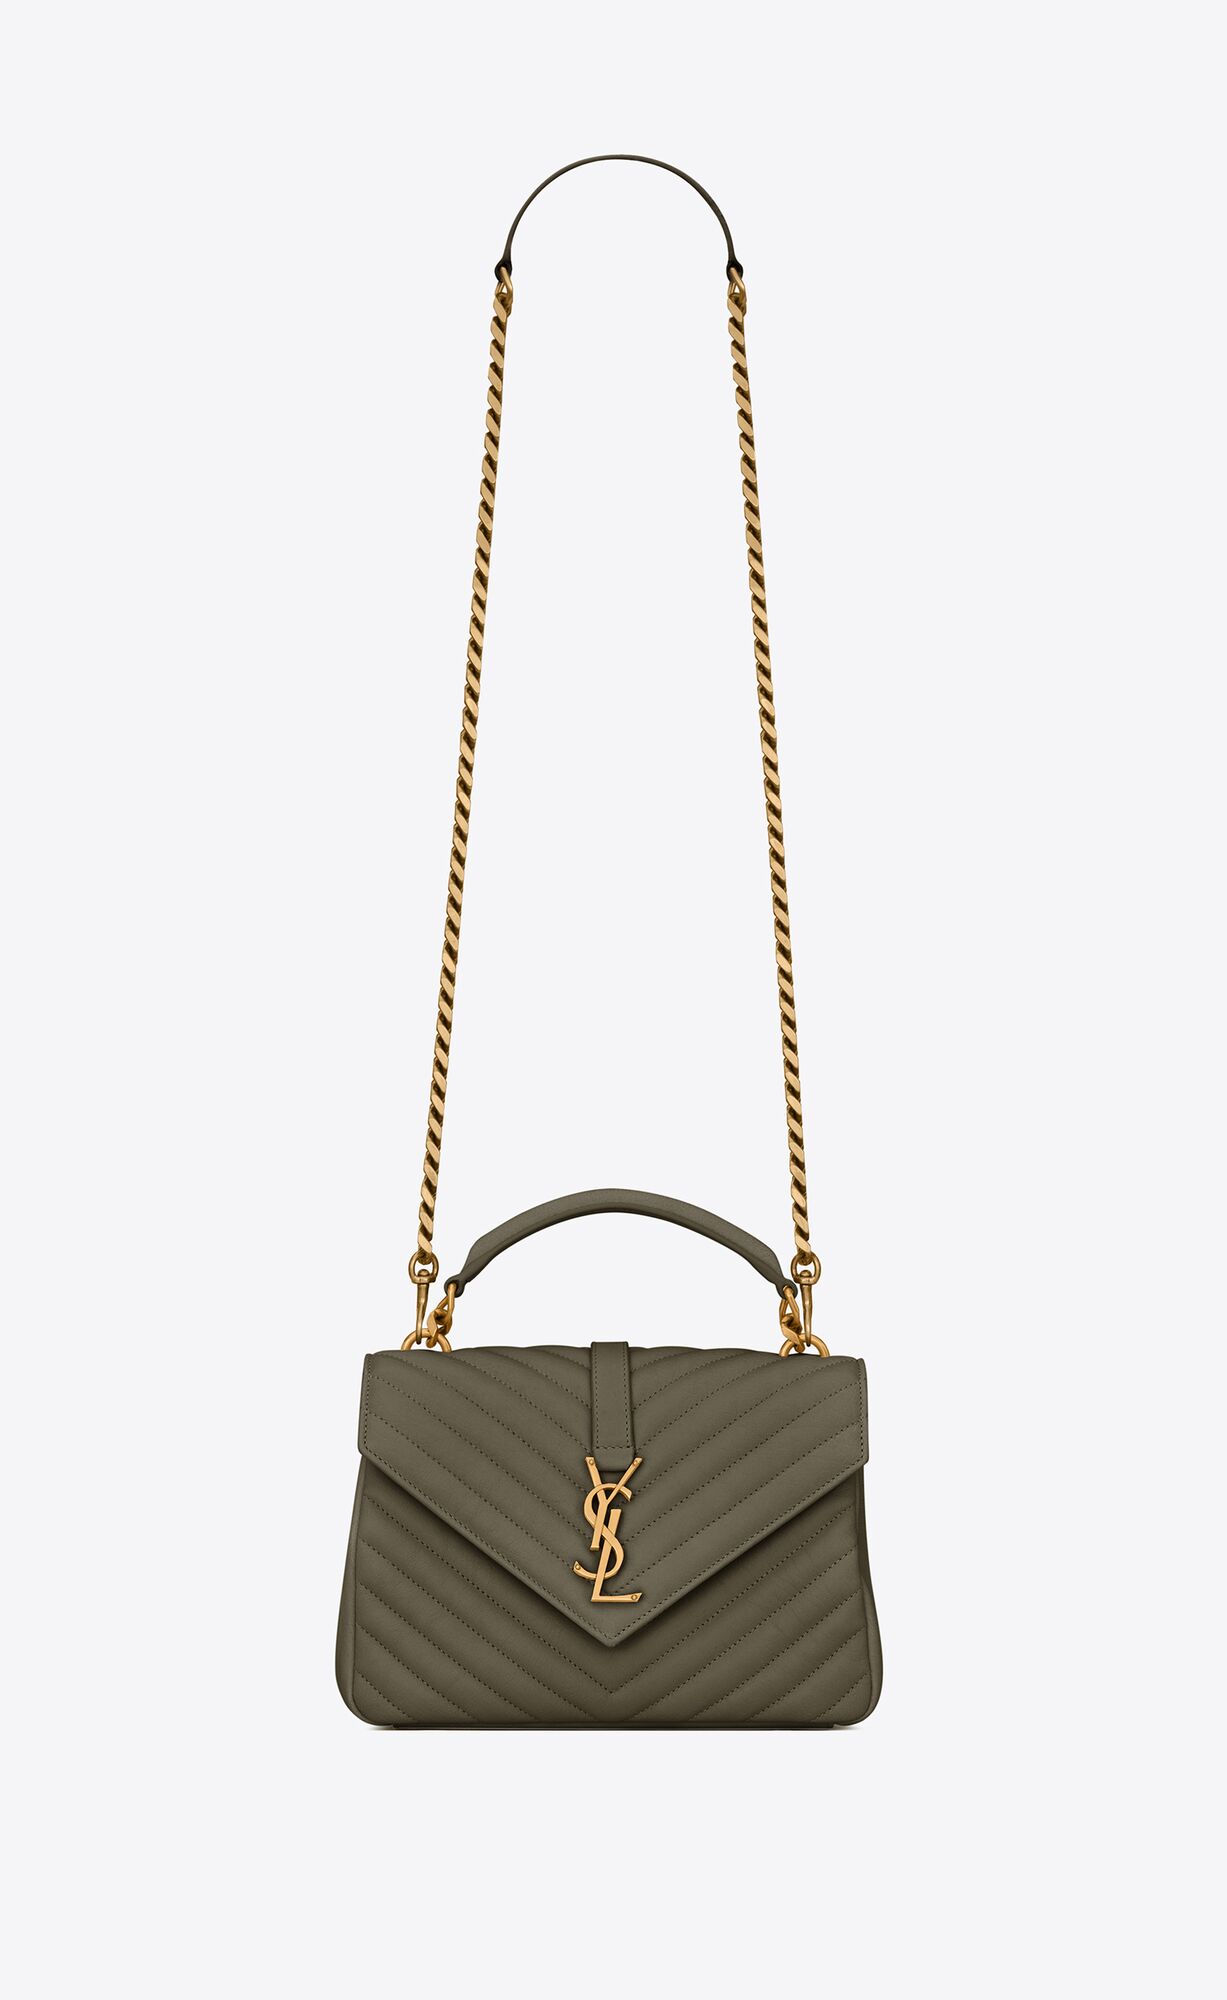 Saint Laurent College Medium Chain Bag In Quilted Leather – Grey Khaki – 600279BRM071229